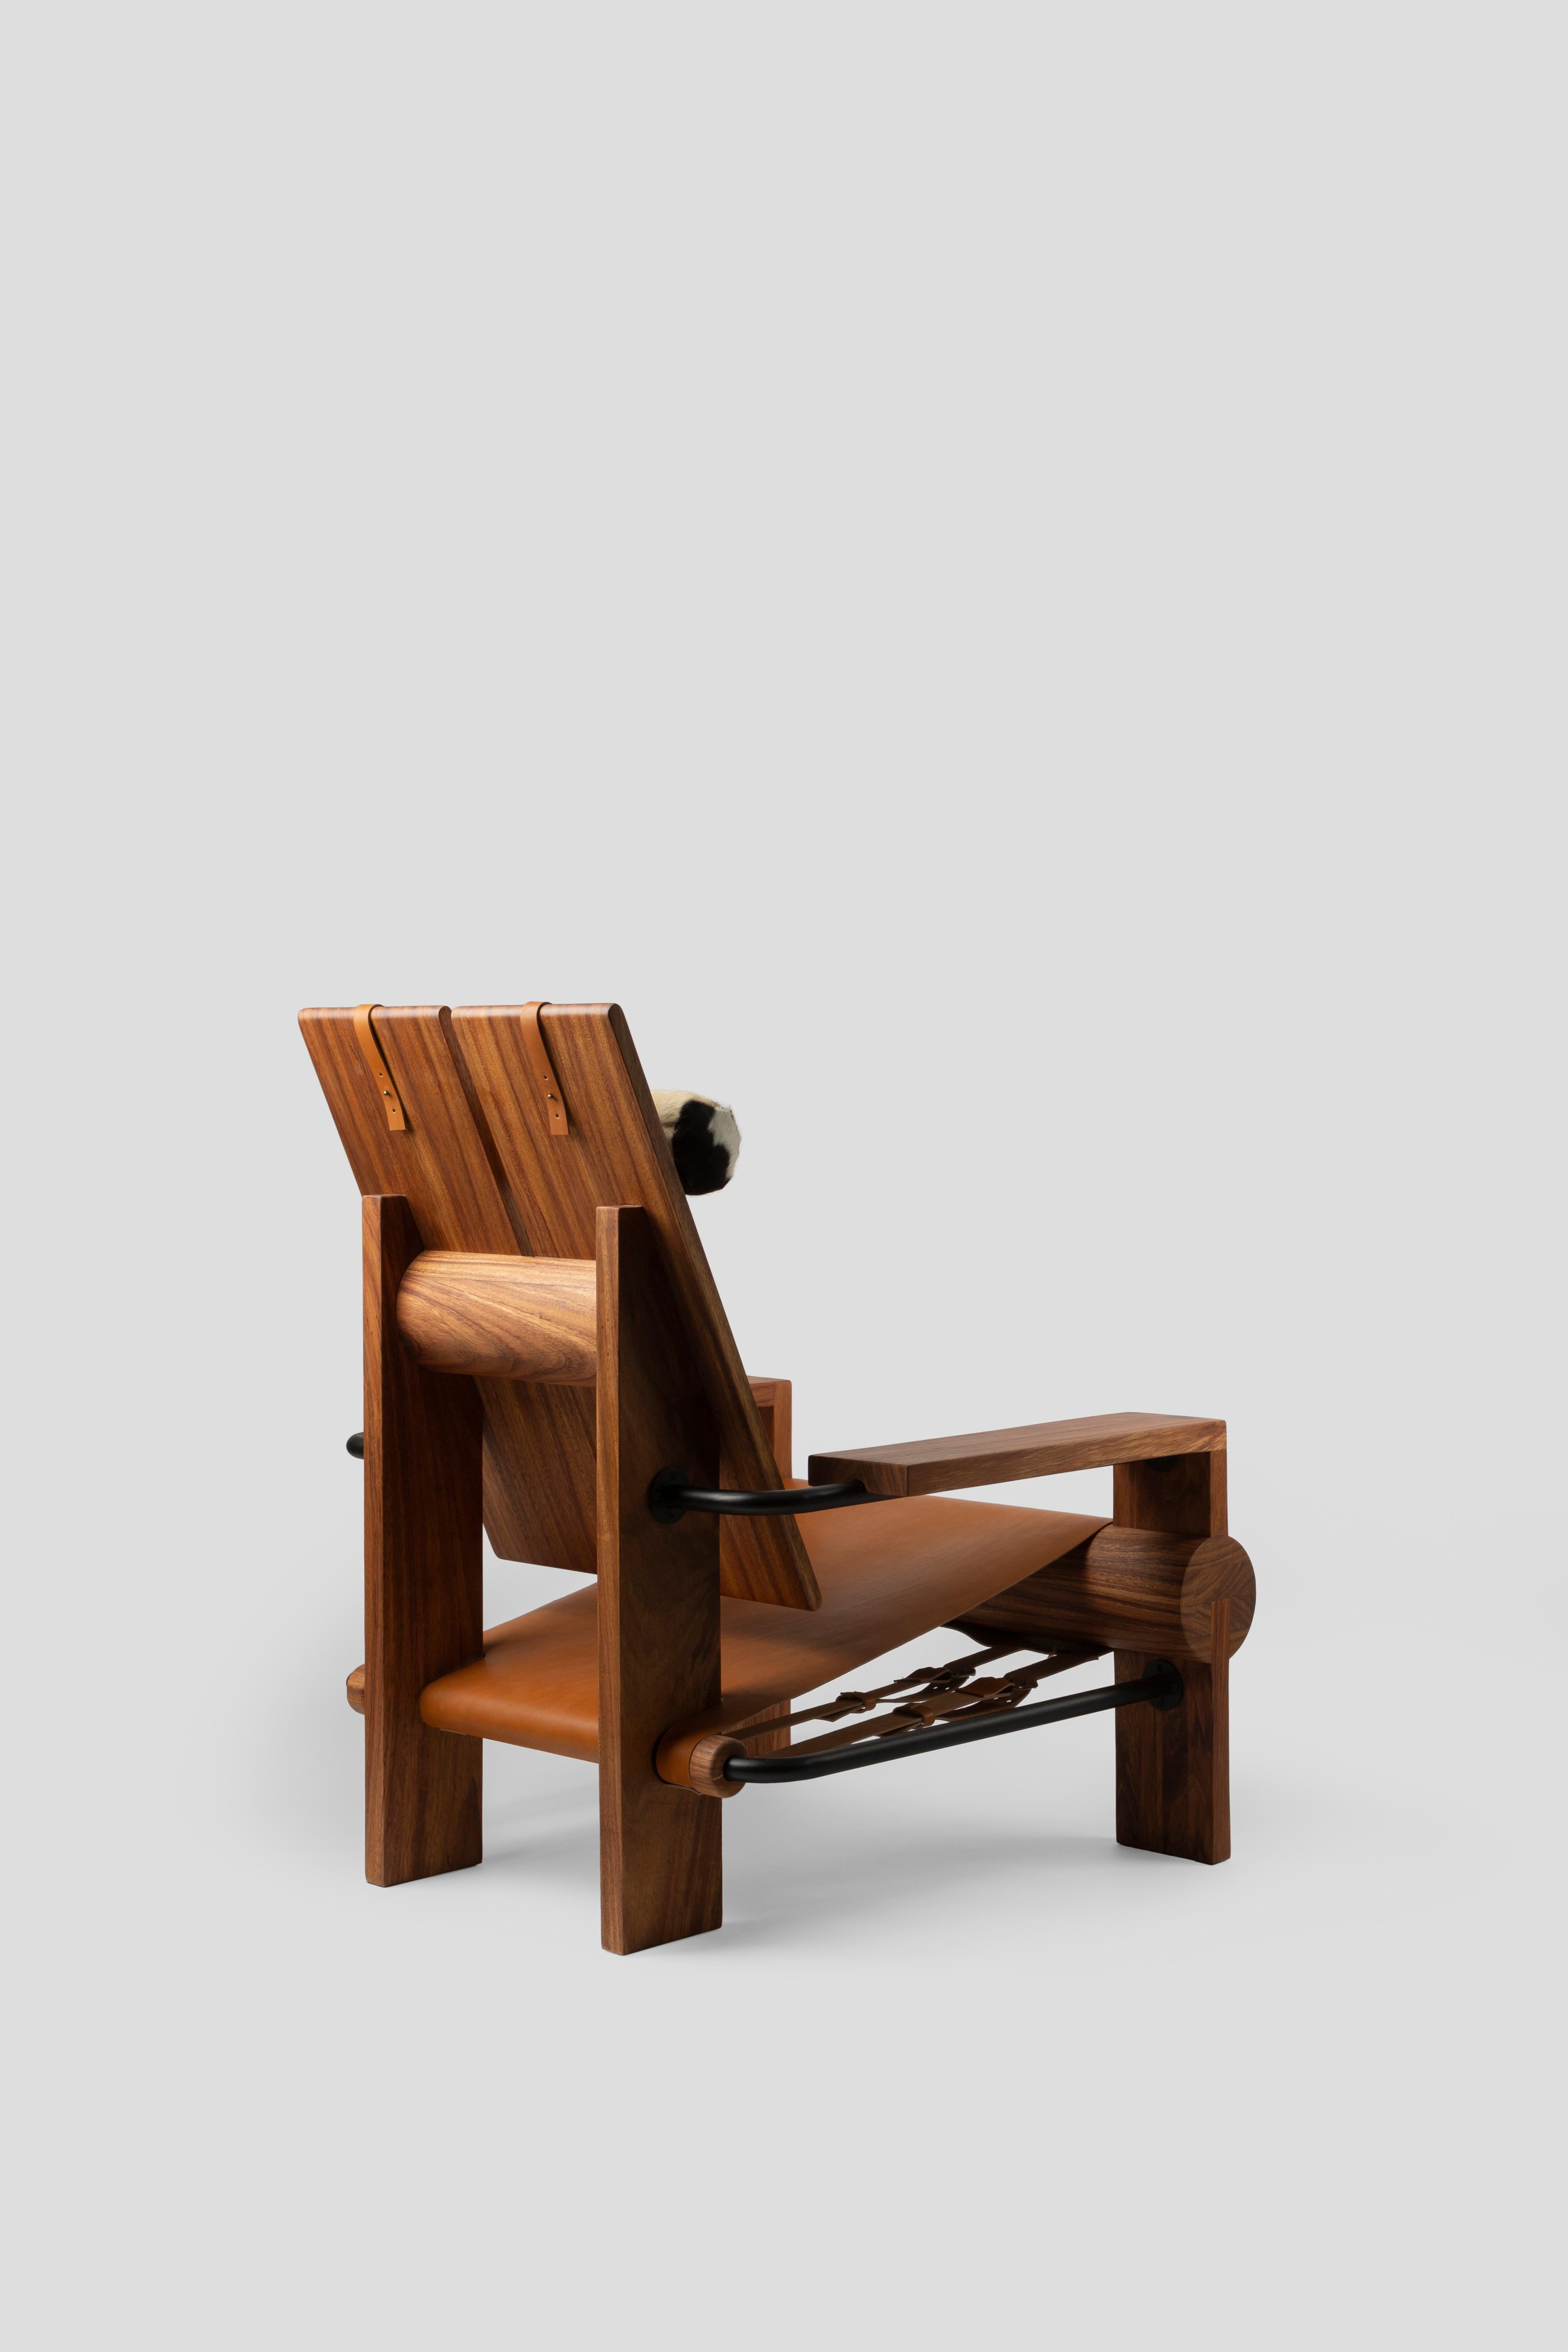 San Francisco chair, Leather and Dark Tropical Wood, Contemporary Mexican Design For Sale 2